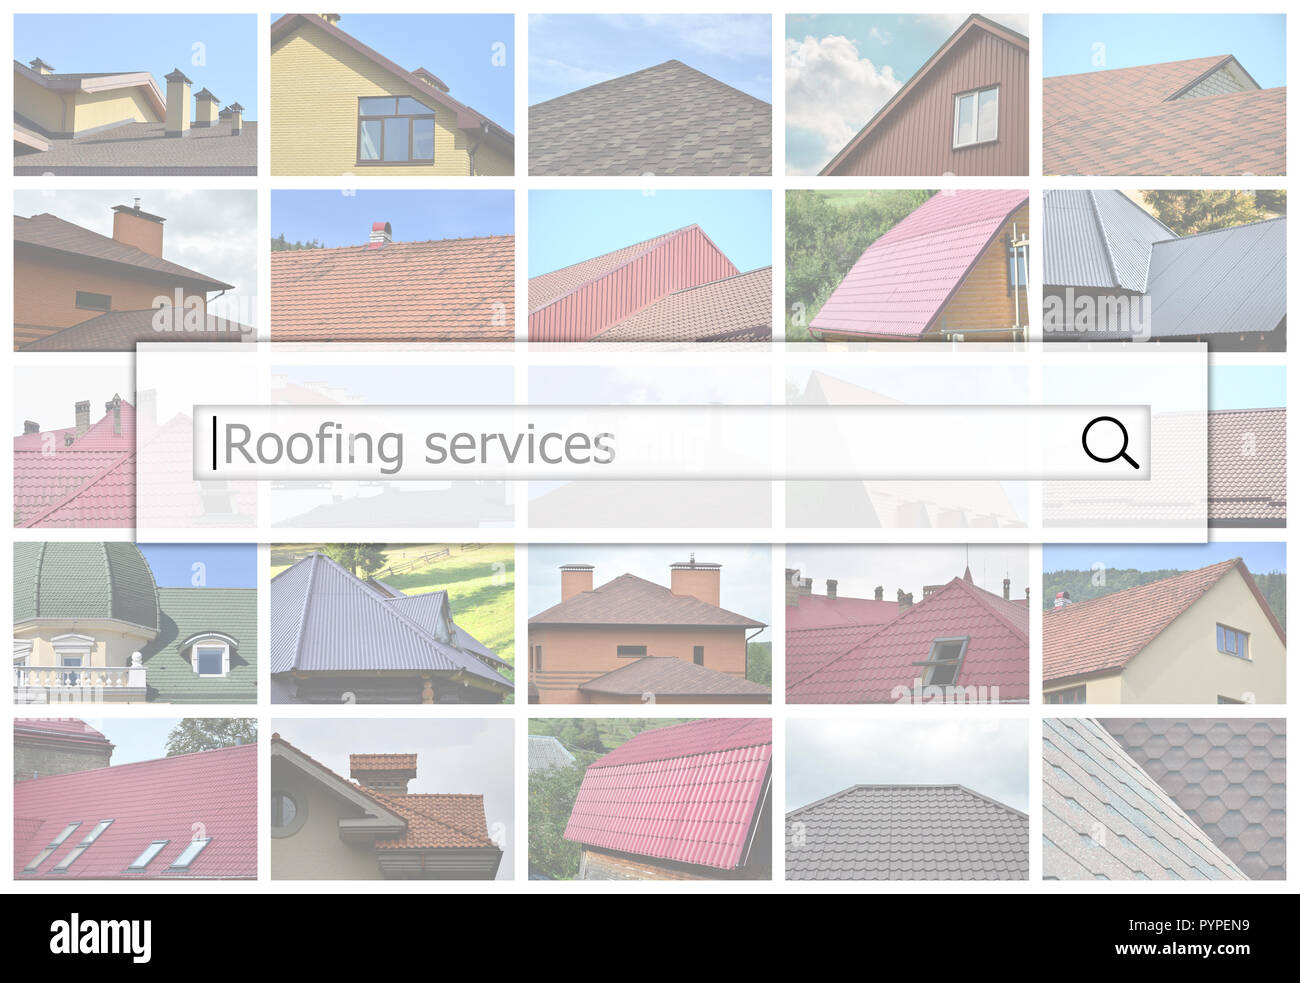 jewell co roofing fl<br>Roofing